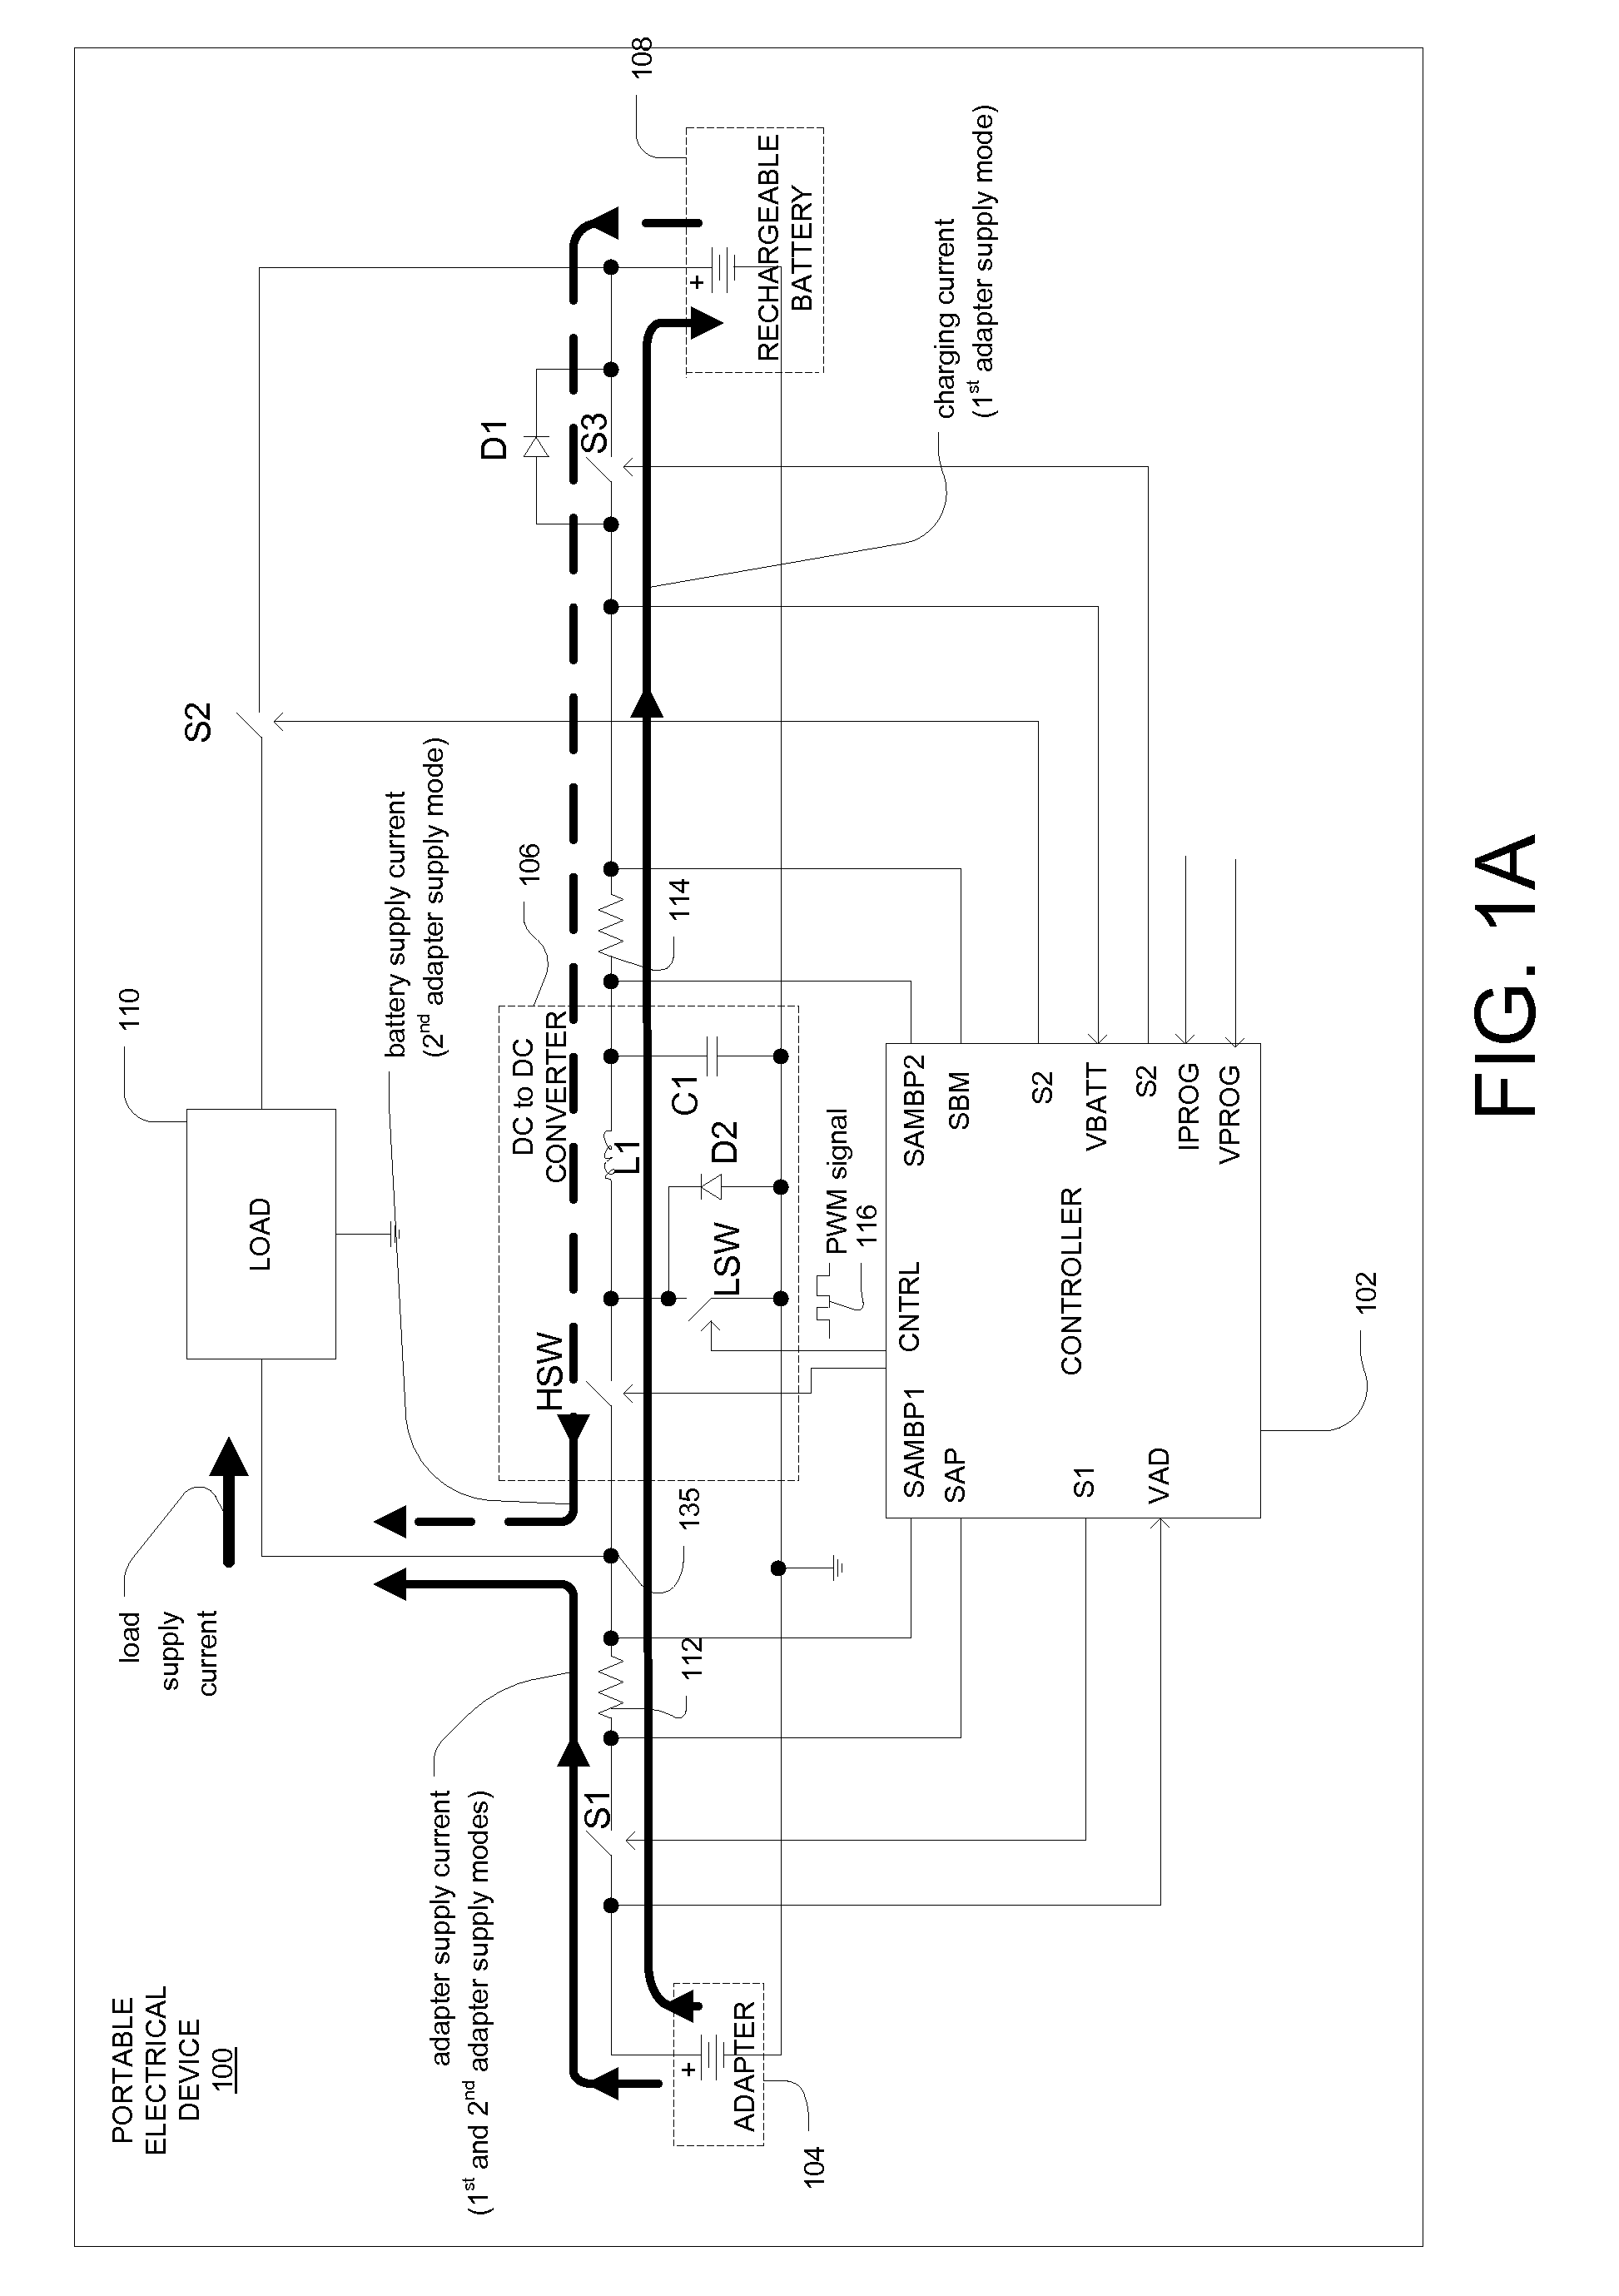 Parallel powering of portable electrical devices